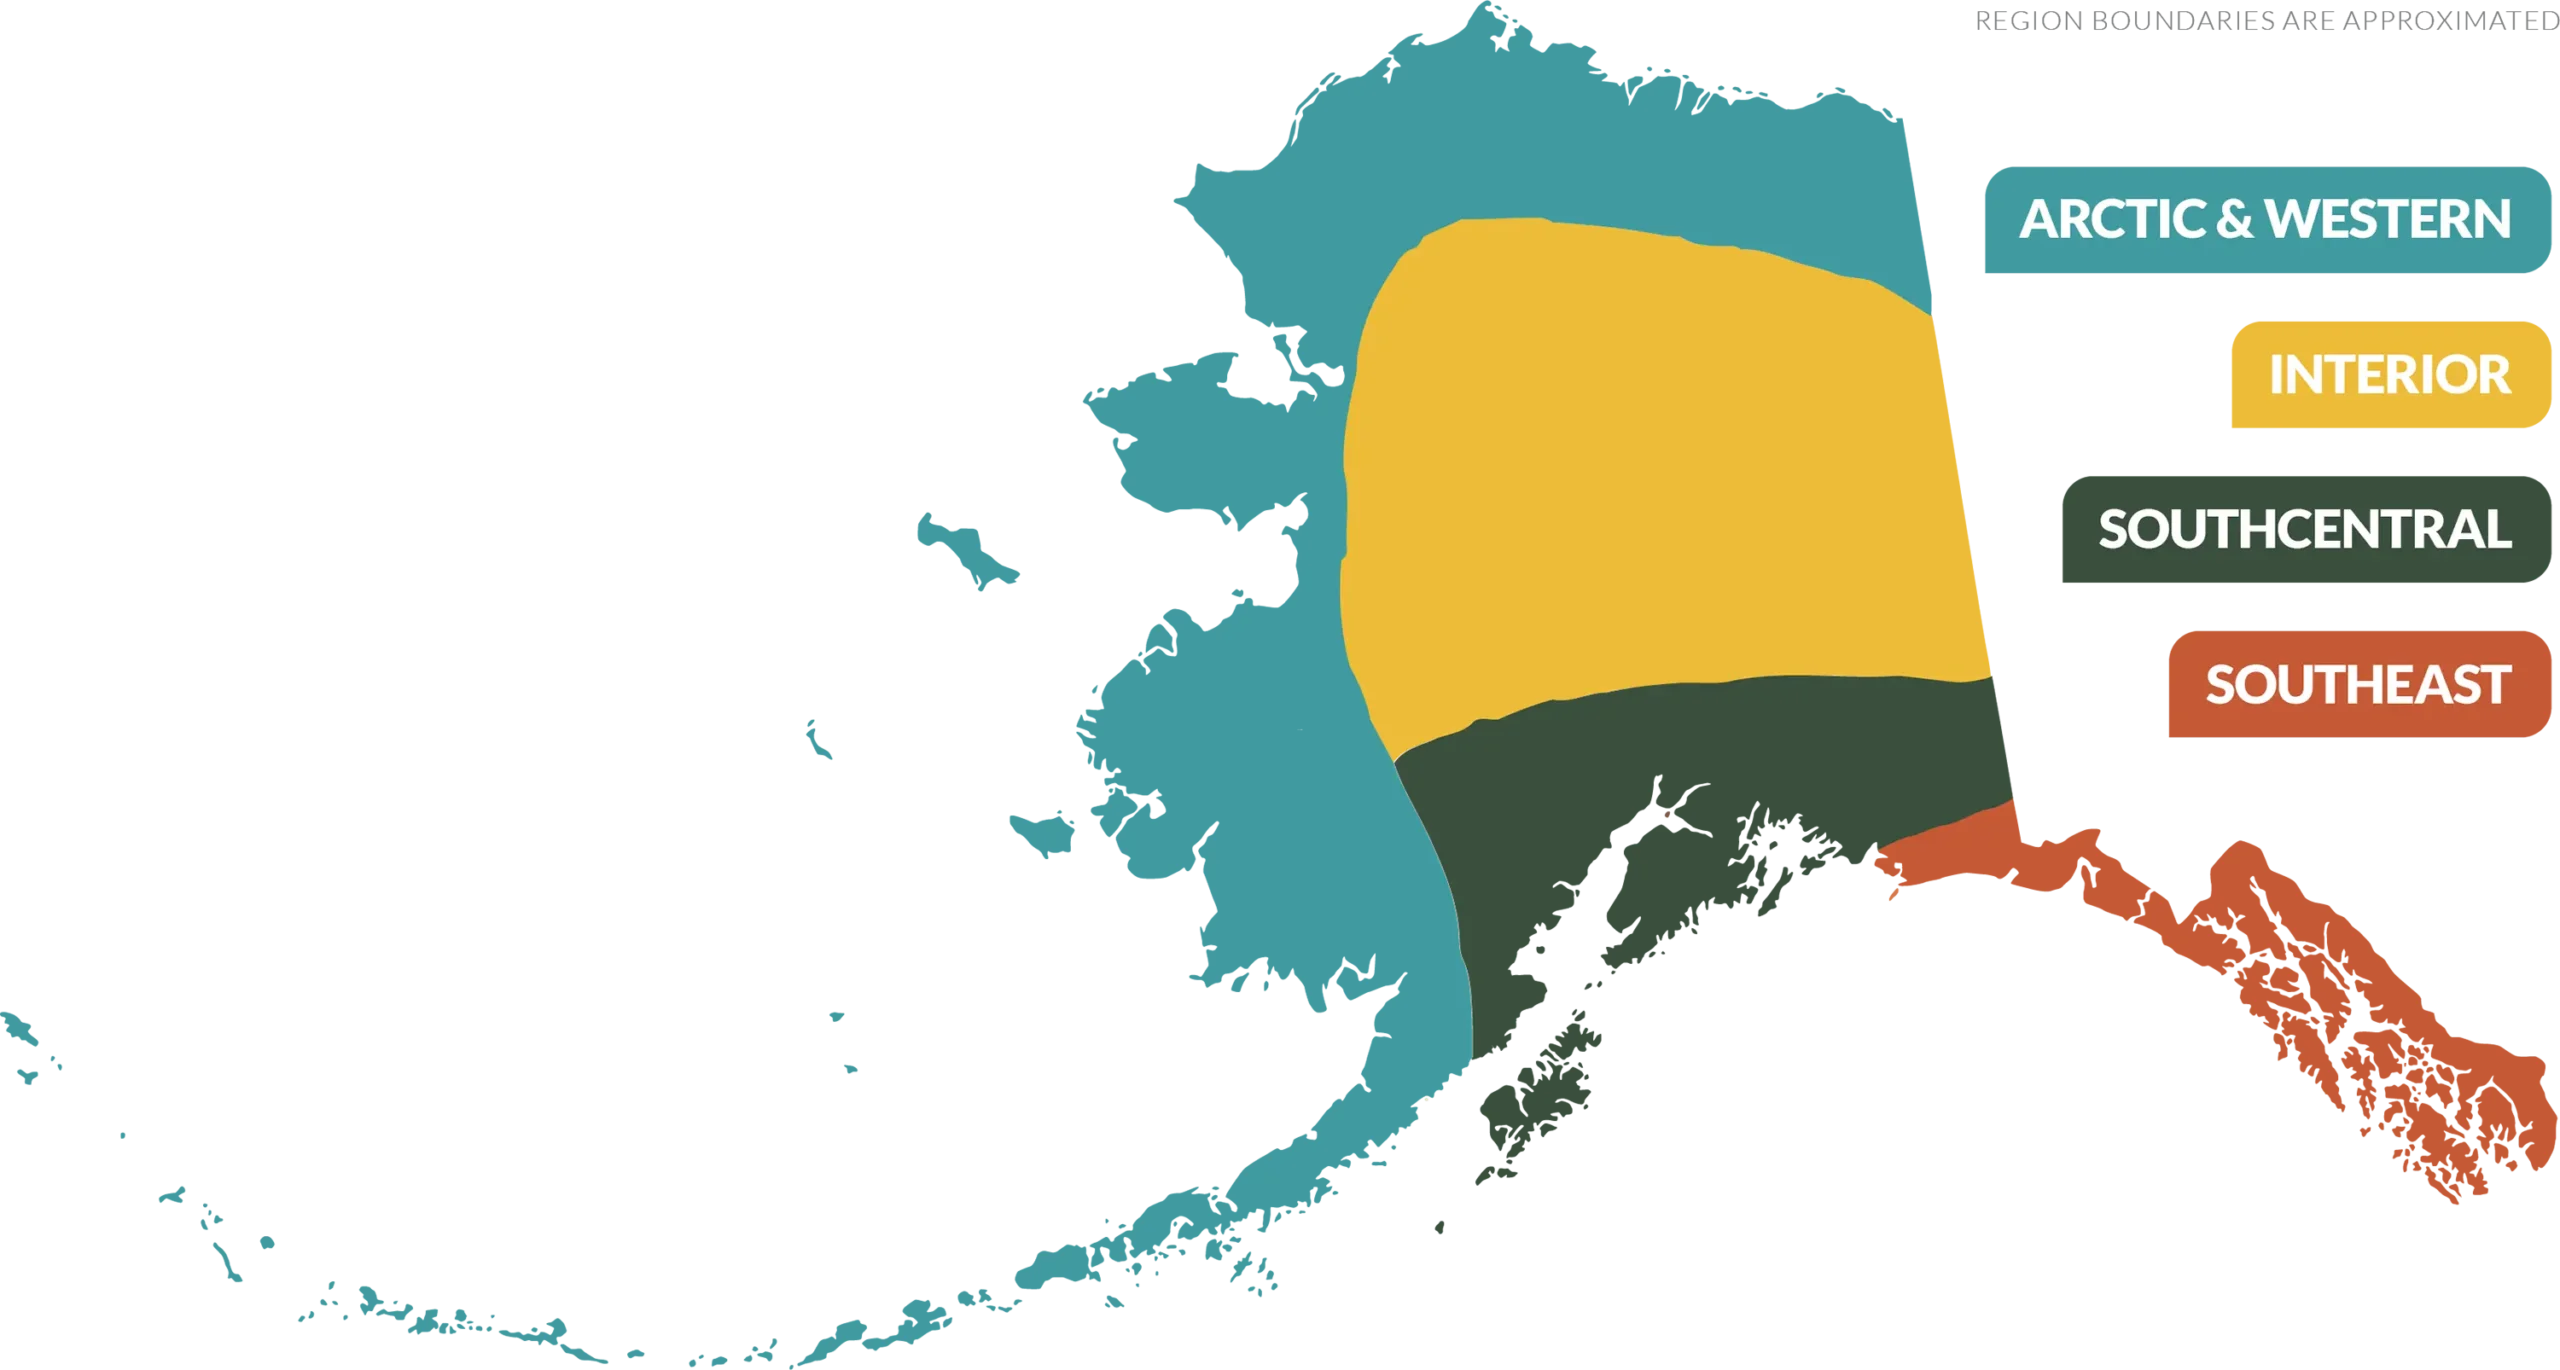 map of the different regions of Alaska